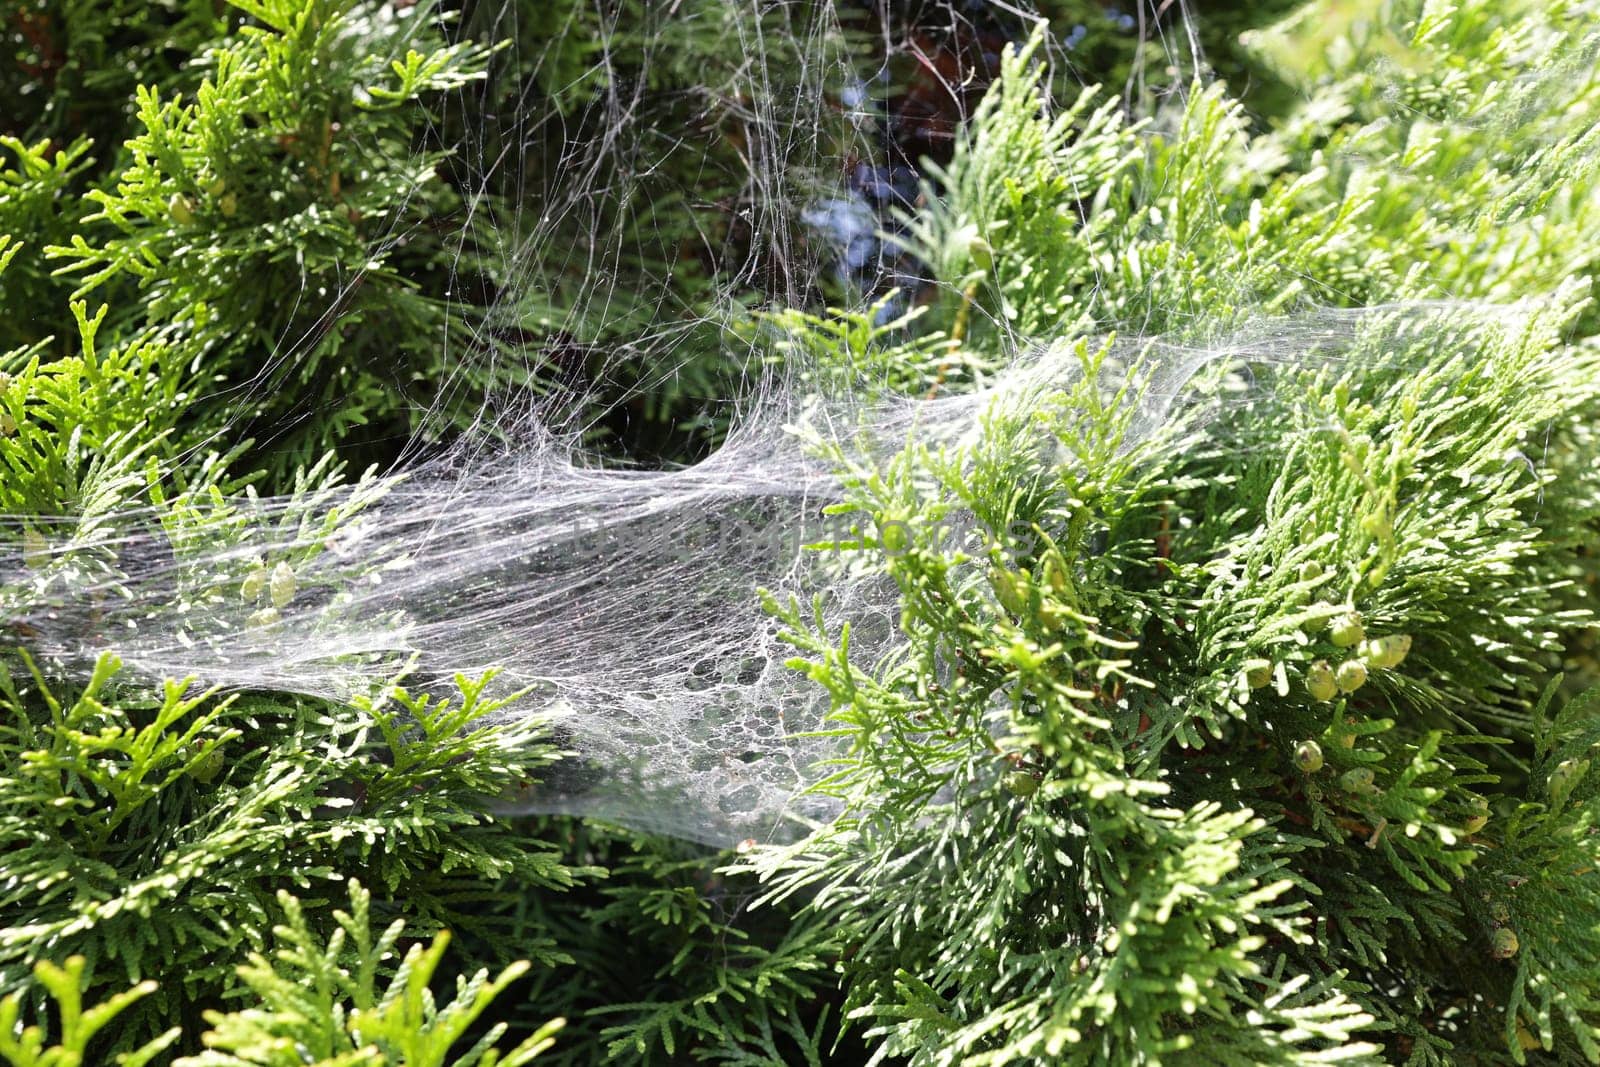 Close-up of a spider web with spider mite specimens on the branches of a coniferous plant.